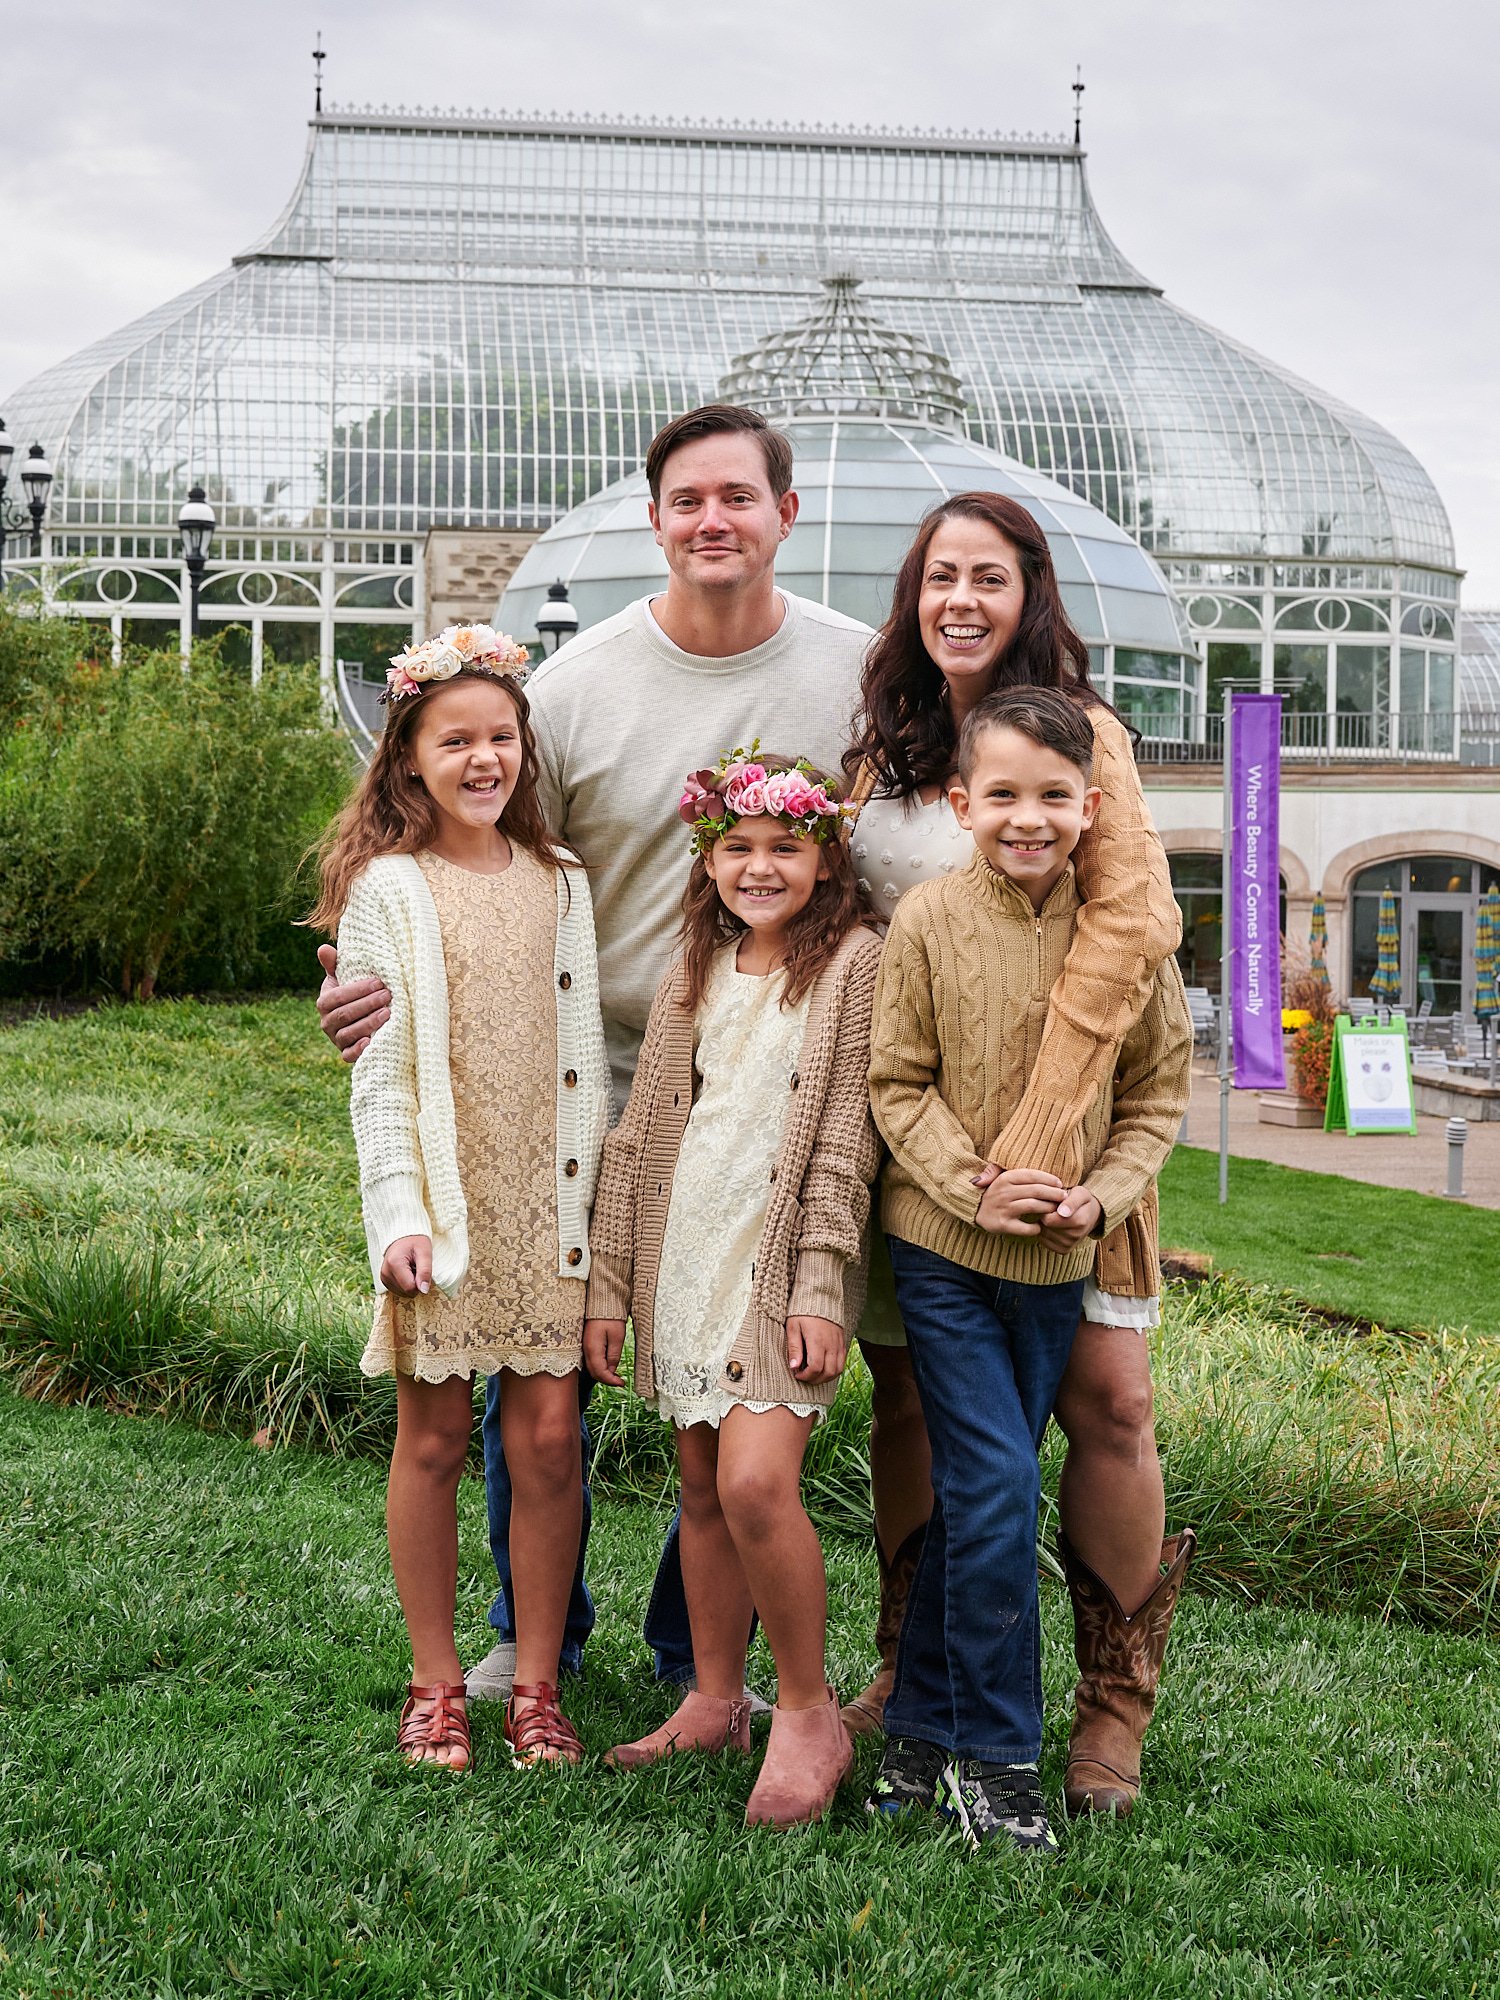  Zack Reed is posing with his wife, son and two daughters in front of Phipps Conservatory and Botanical Gardens of Pittsburgh, Pennsylvania. The ladies are wearing embroidered beige dresses and flowers 